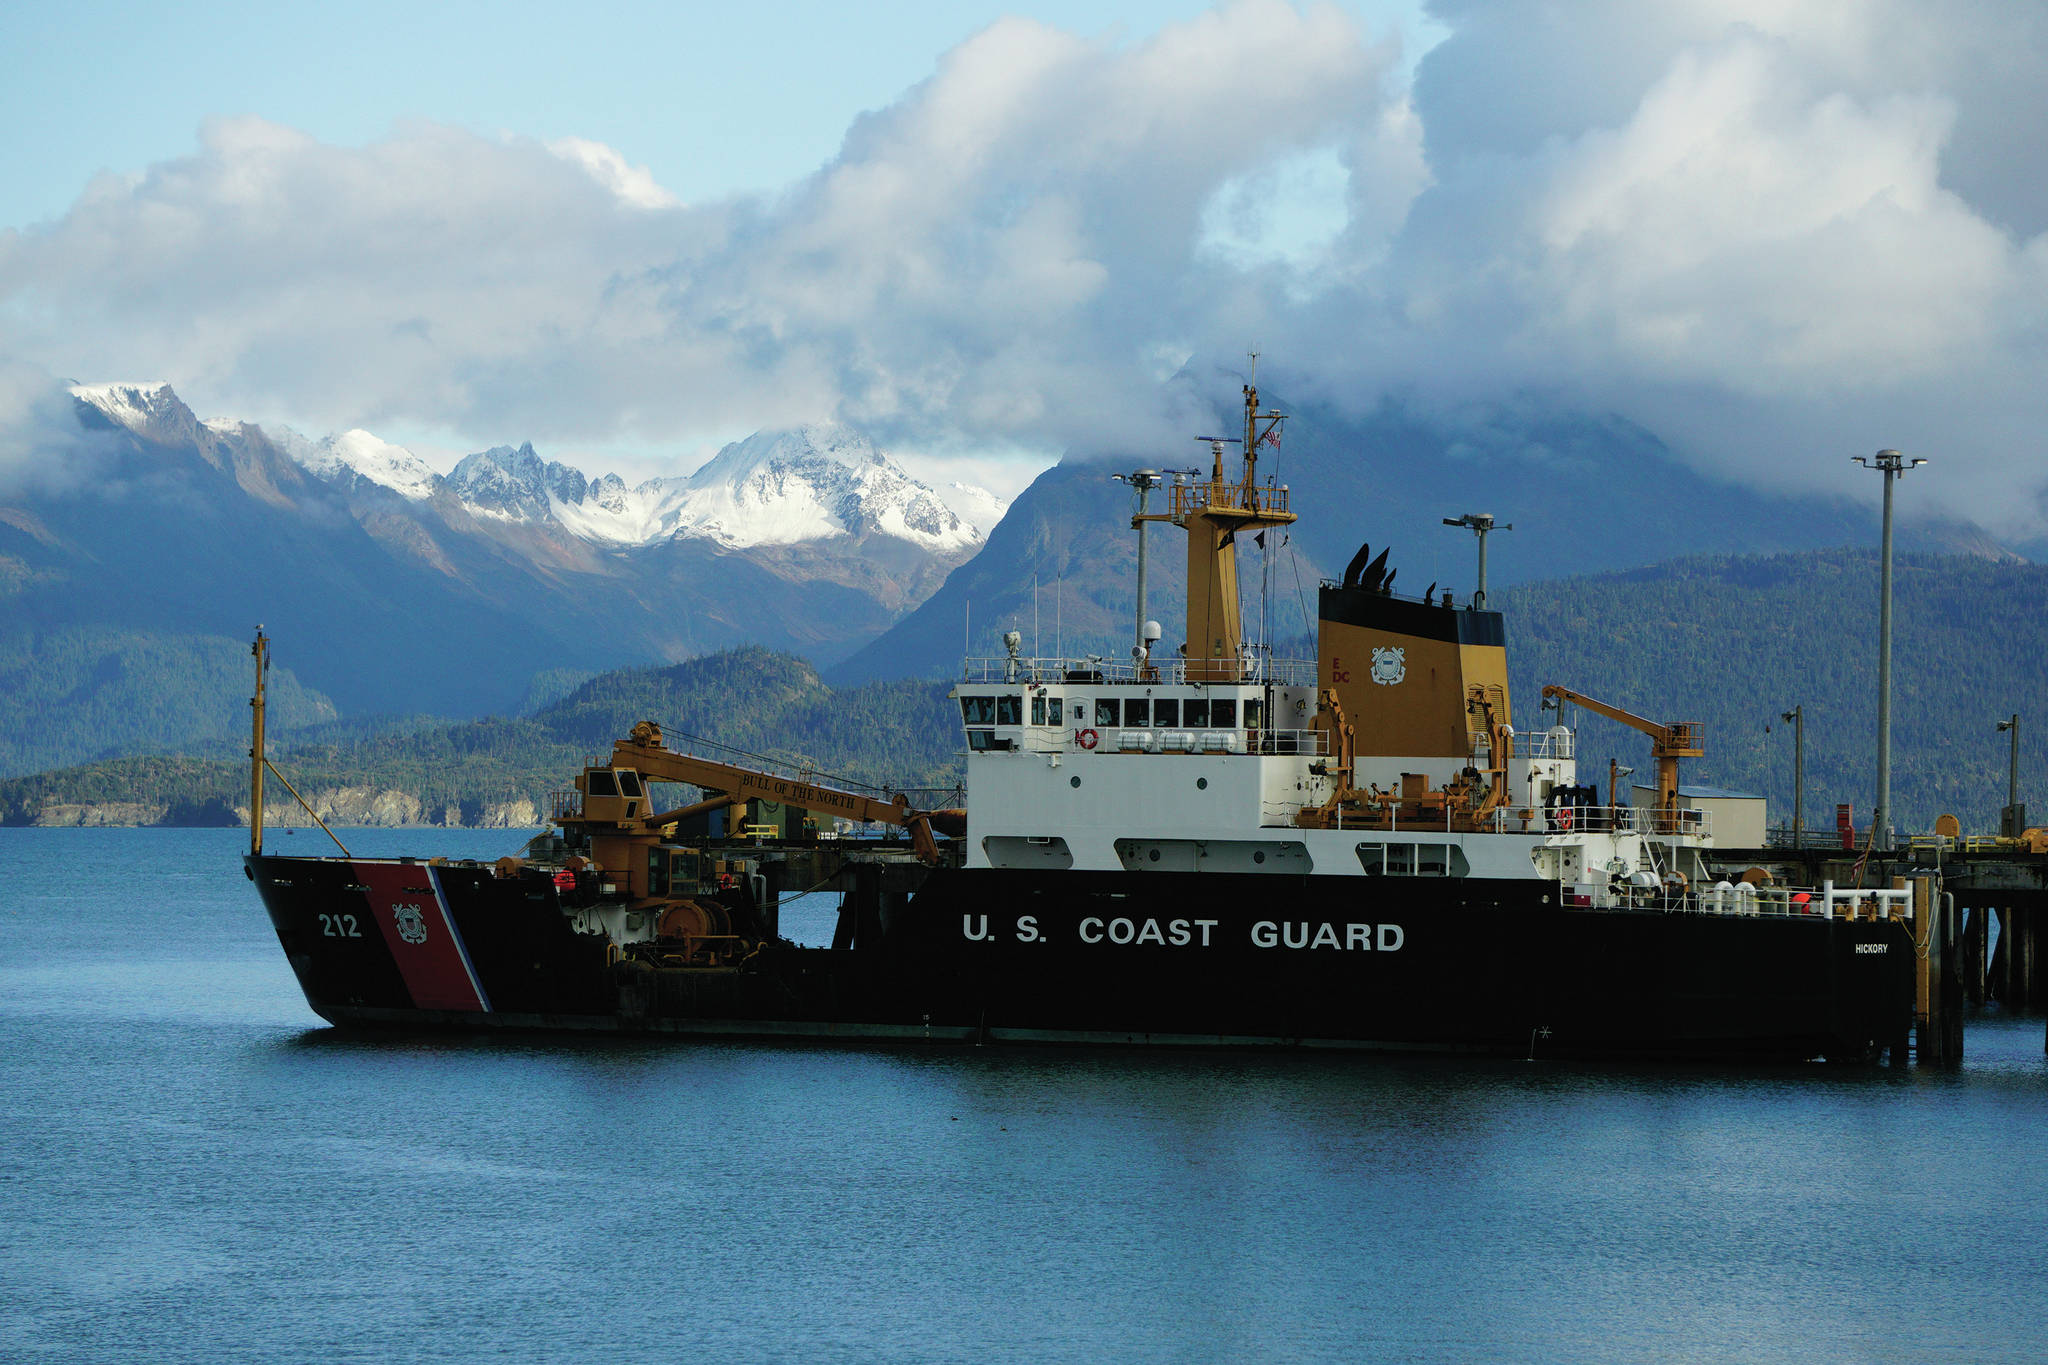 The U.S. Coast Guard Cutter Hickory is moored on Oct. 10, 2020, at the Pioneer Dock in Homer, Alaska. Fresh snow or termination dust covers the peaks of the Kenai Mountains across Kachemak Bay, a sign of the coming winter. (Photo by Michael Armstrong/Homer News)